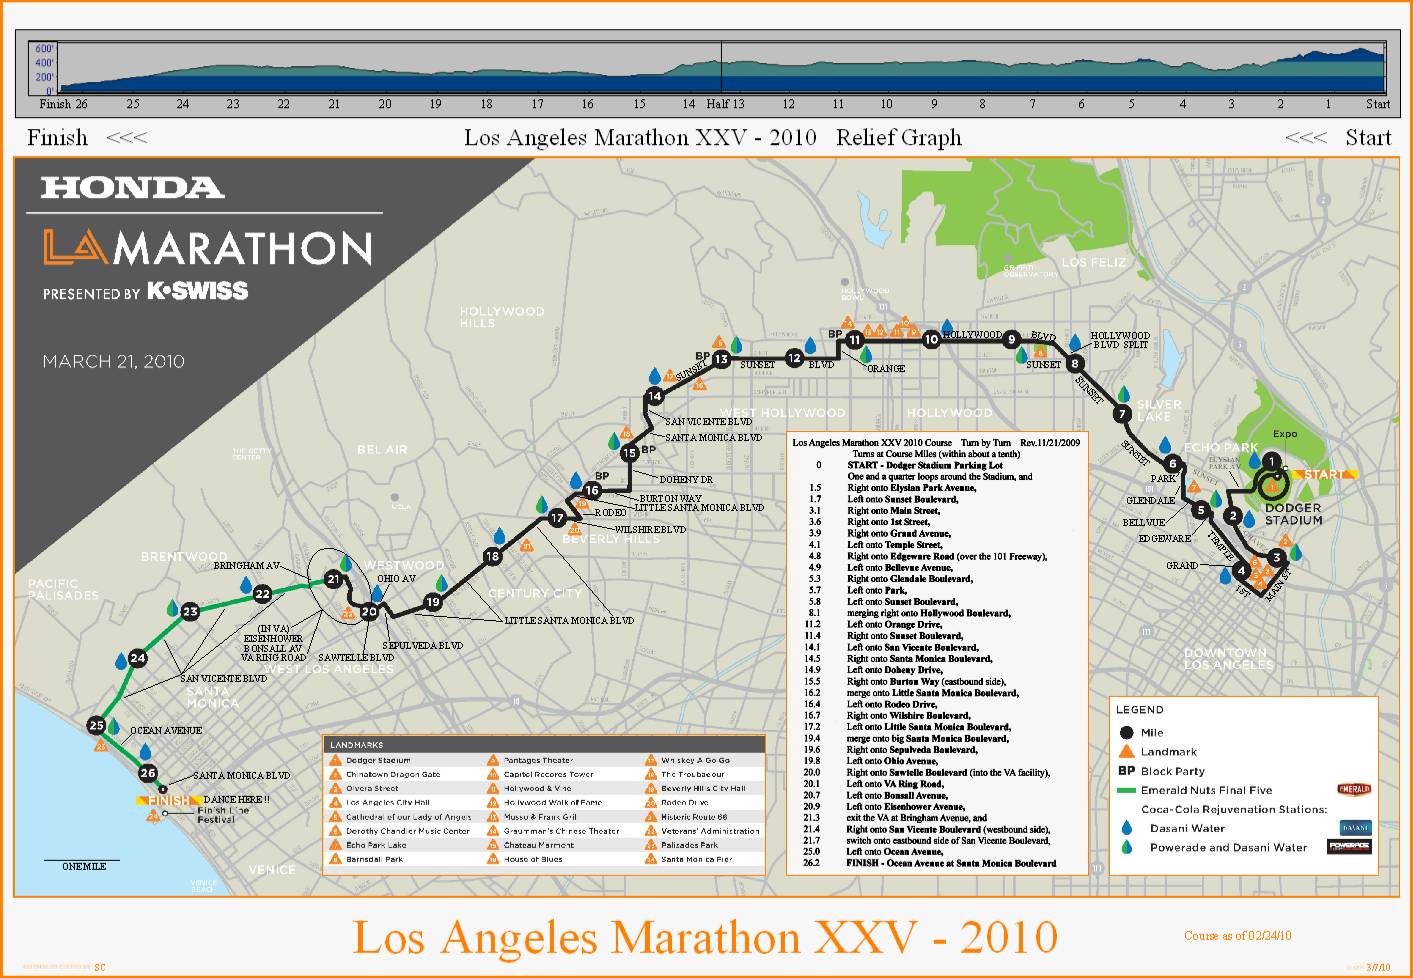 Foothill Flyers - Los Angeles Marathon review